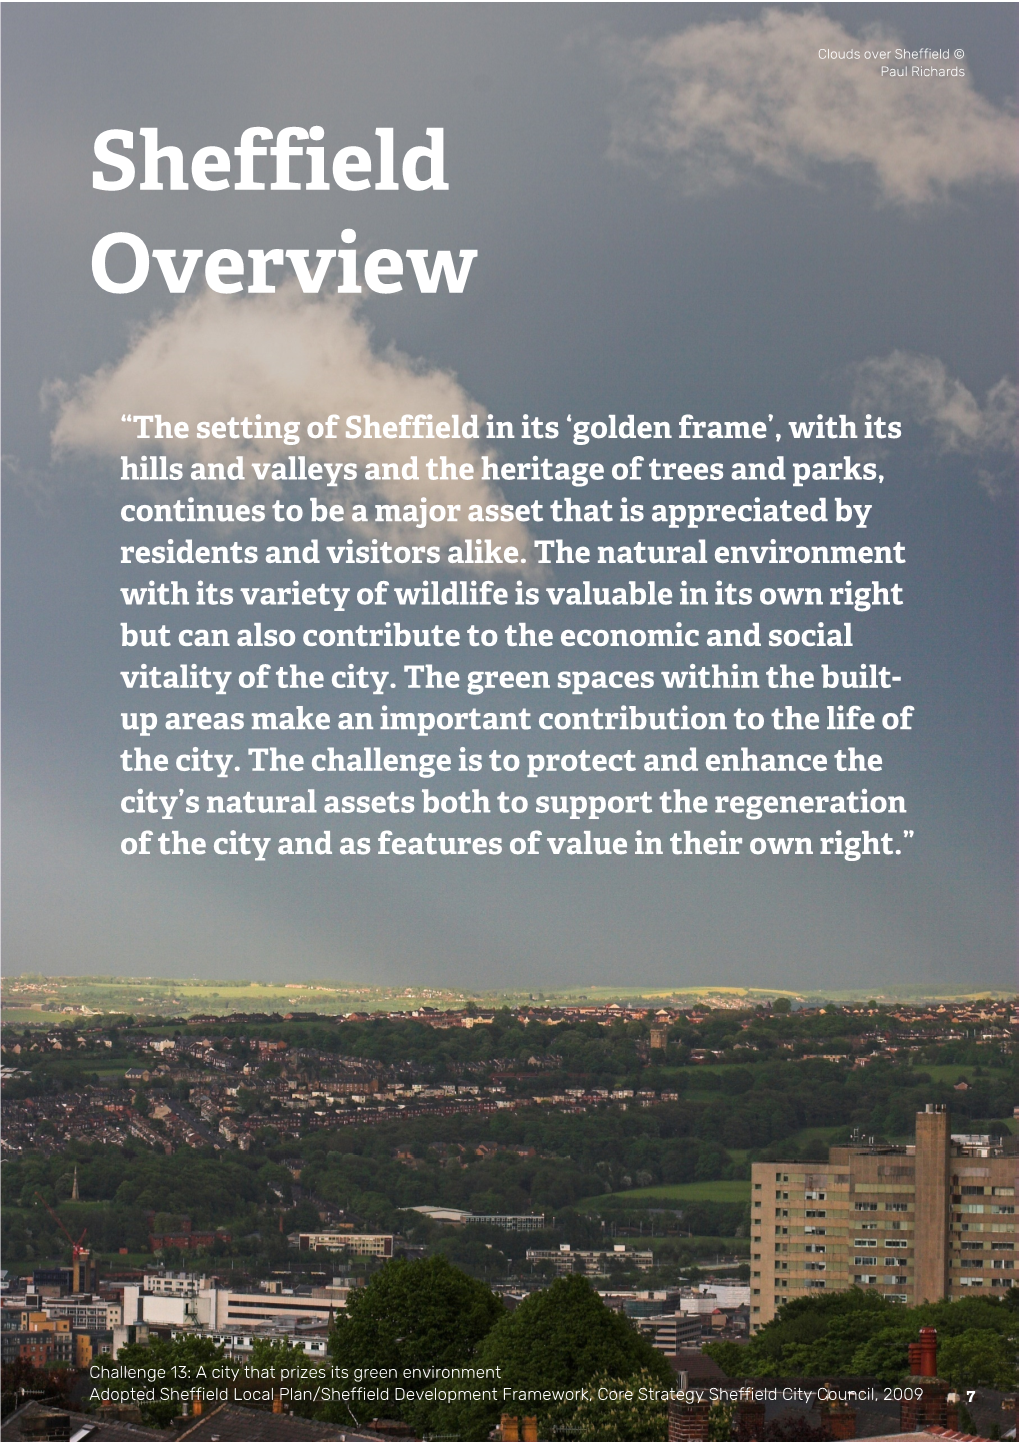 Sheffield Overview